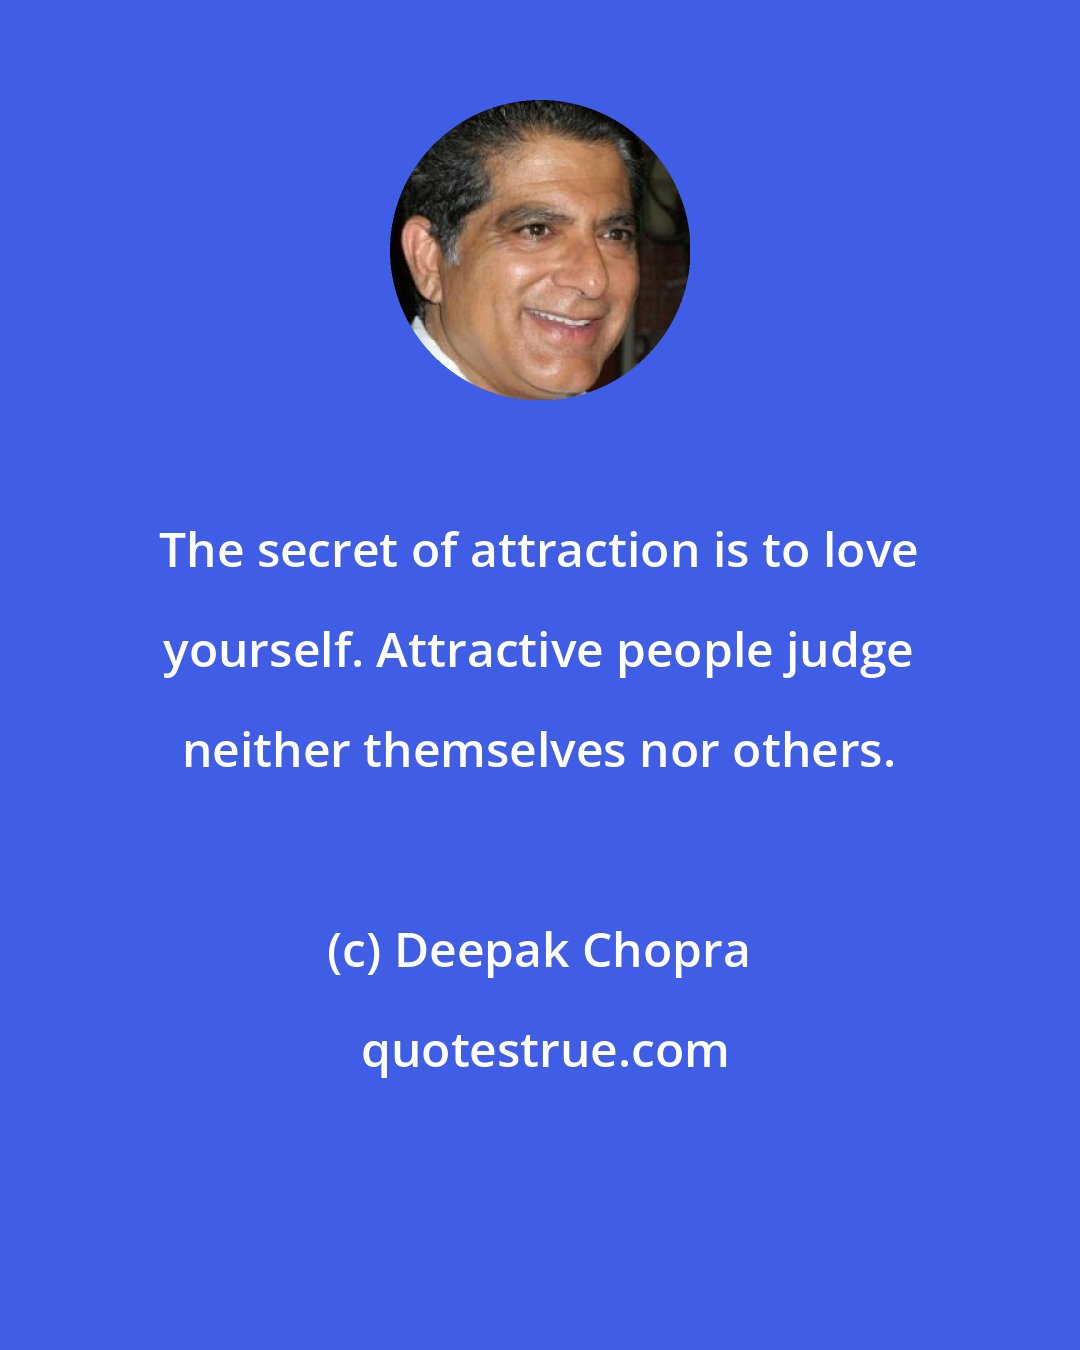 Deepak Chopra: The secret of attraction is to love yourself. Attractive people judge neither themselves nor others.